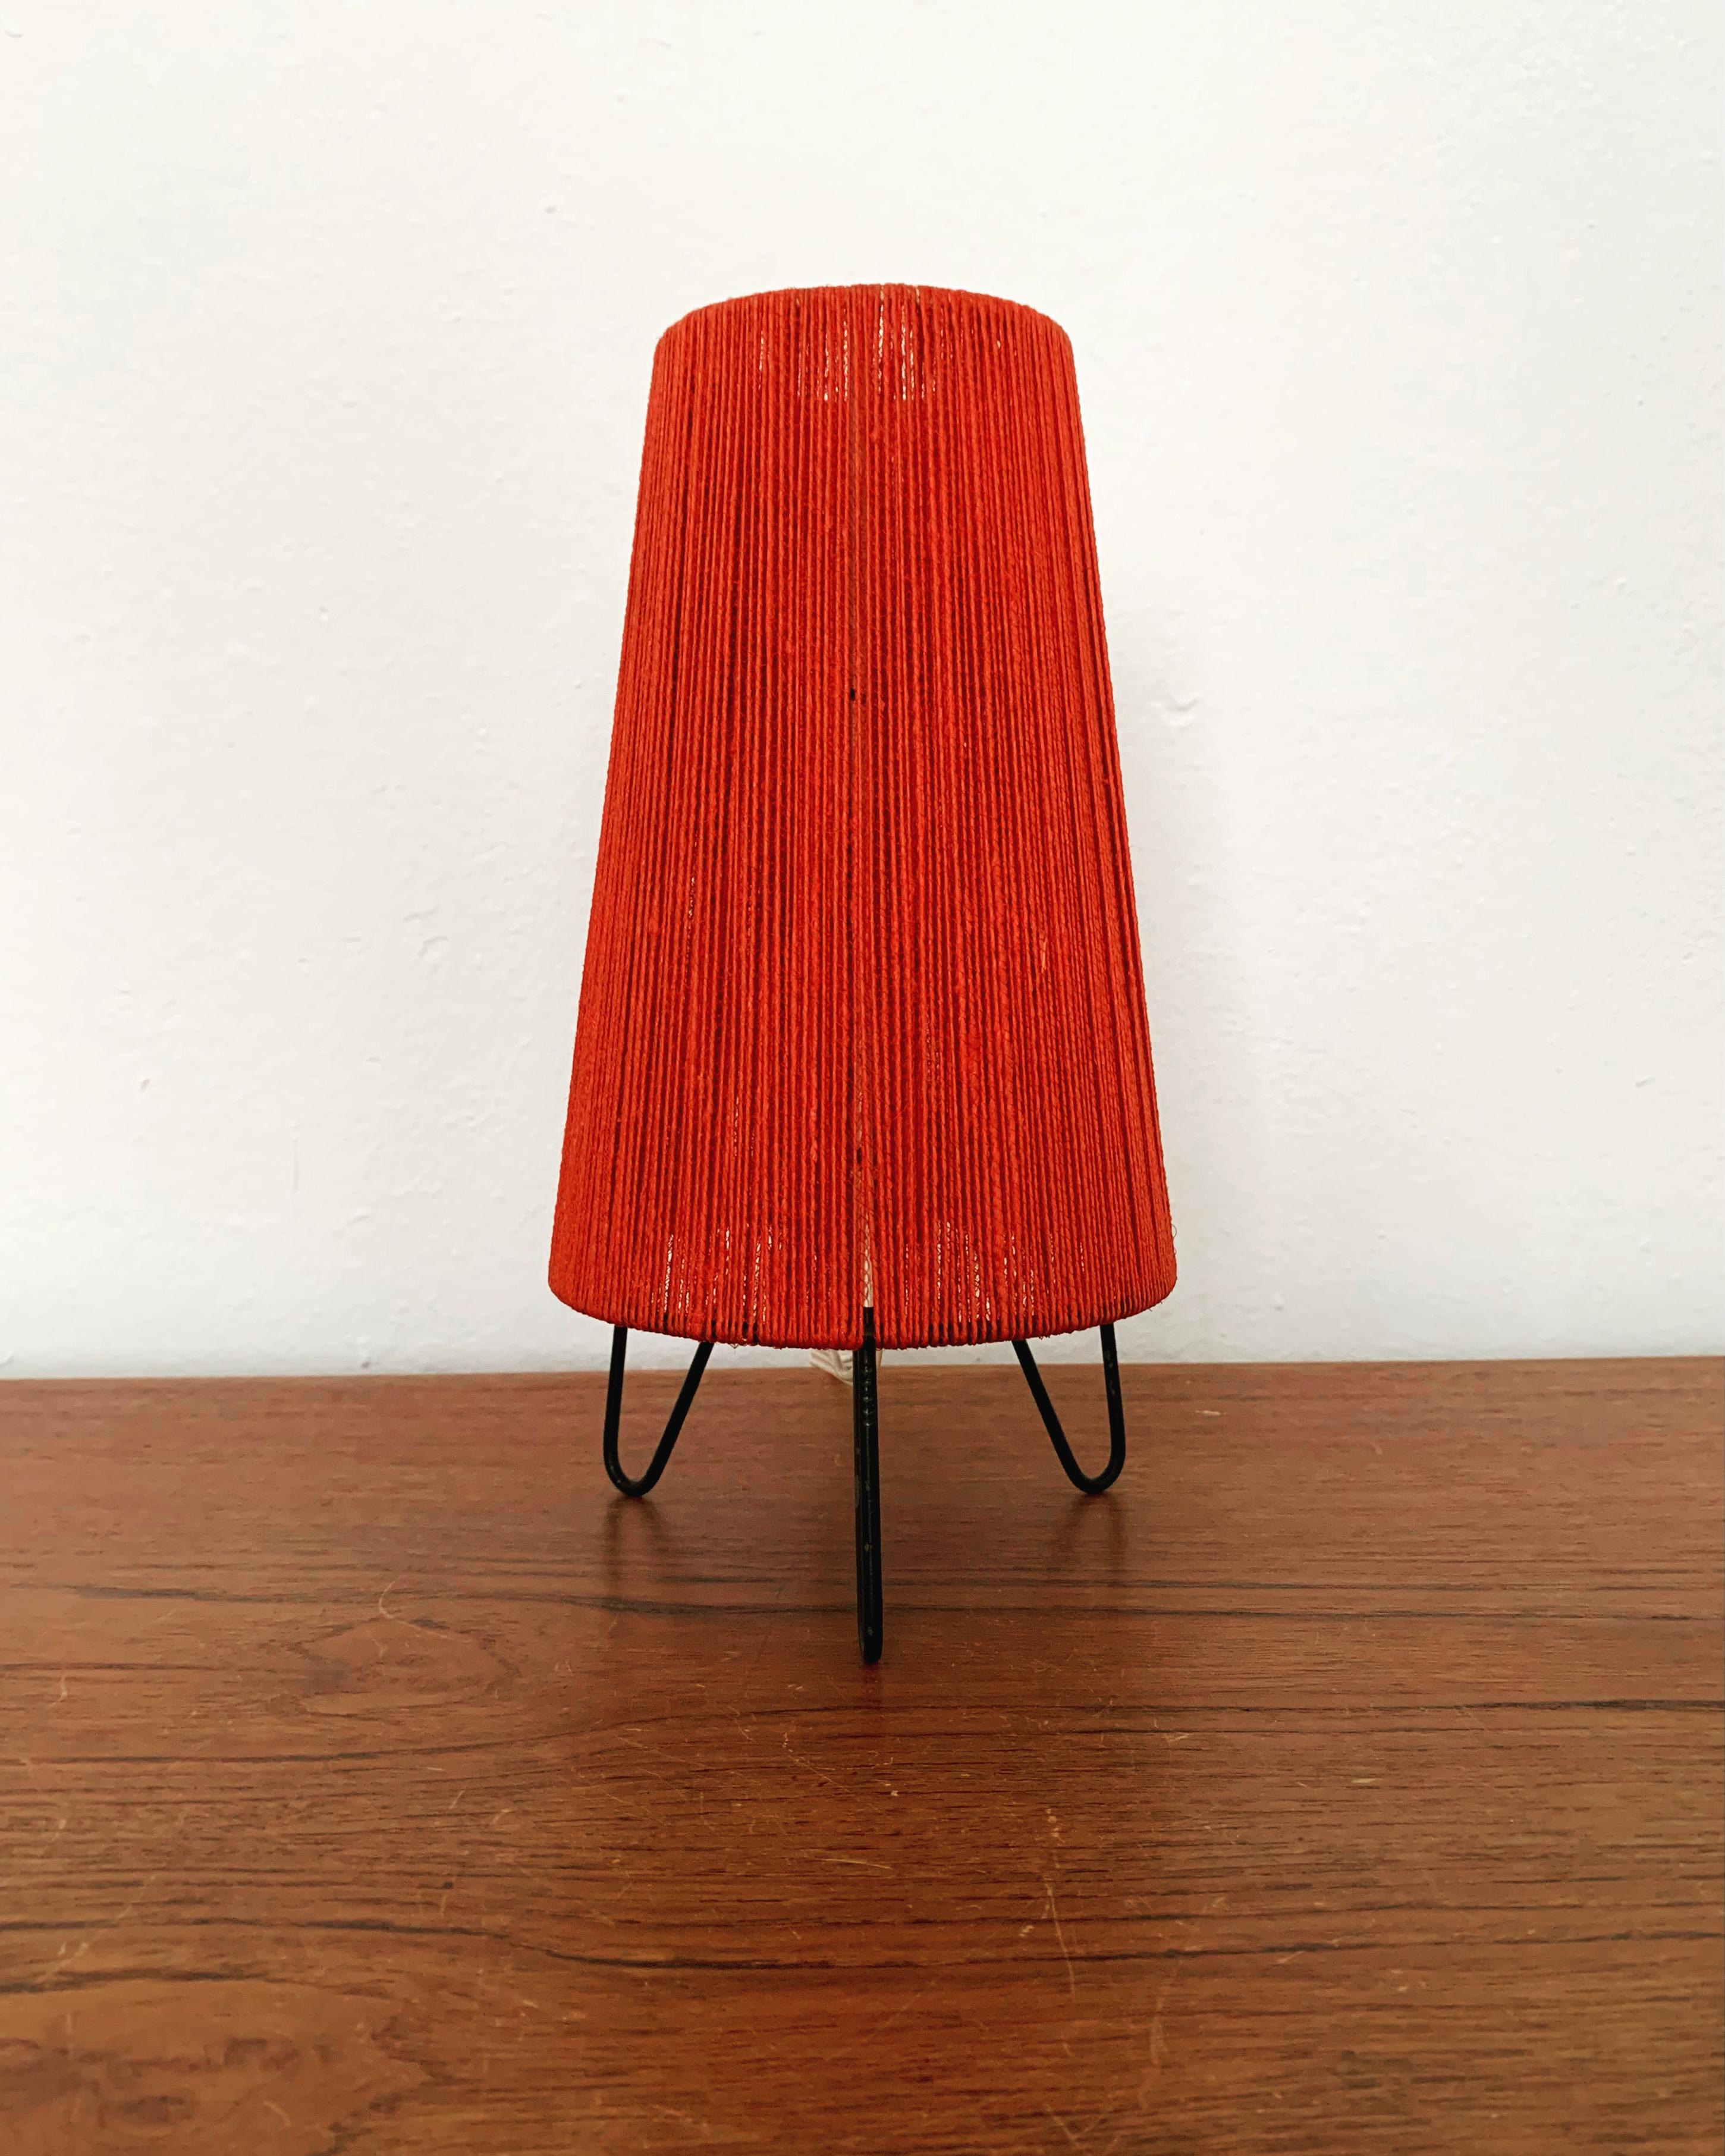 Charming raffia table lamp from the 1950s.
The design is very unusual.
The shape and the materials create a warm and very pleasant light.

Condition:

Very good vintage condition with slight signs of wear consistent with age.
The raffia